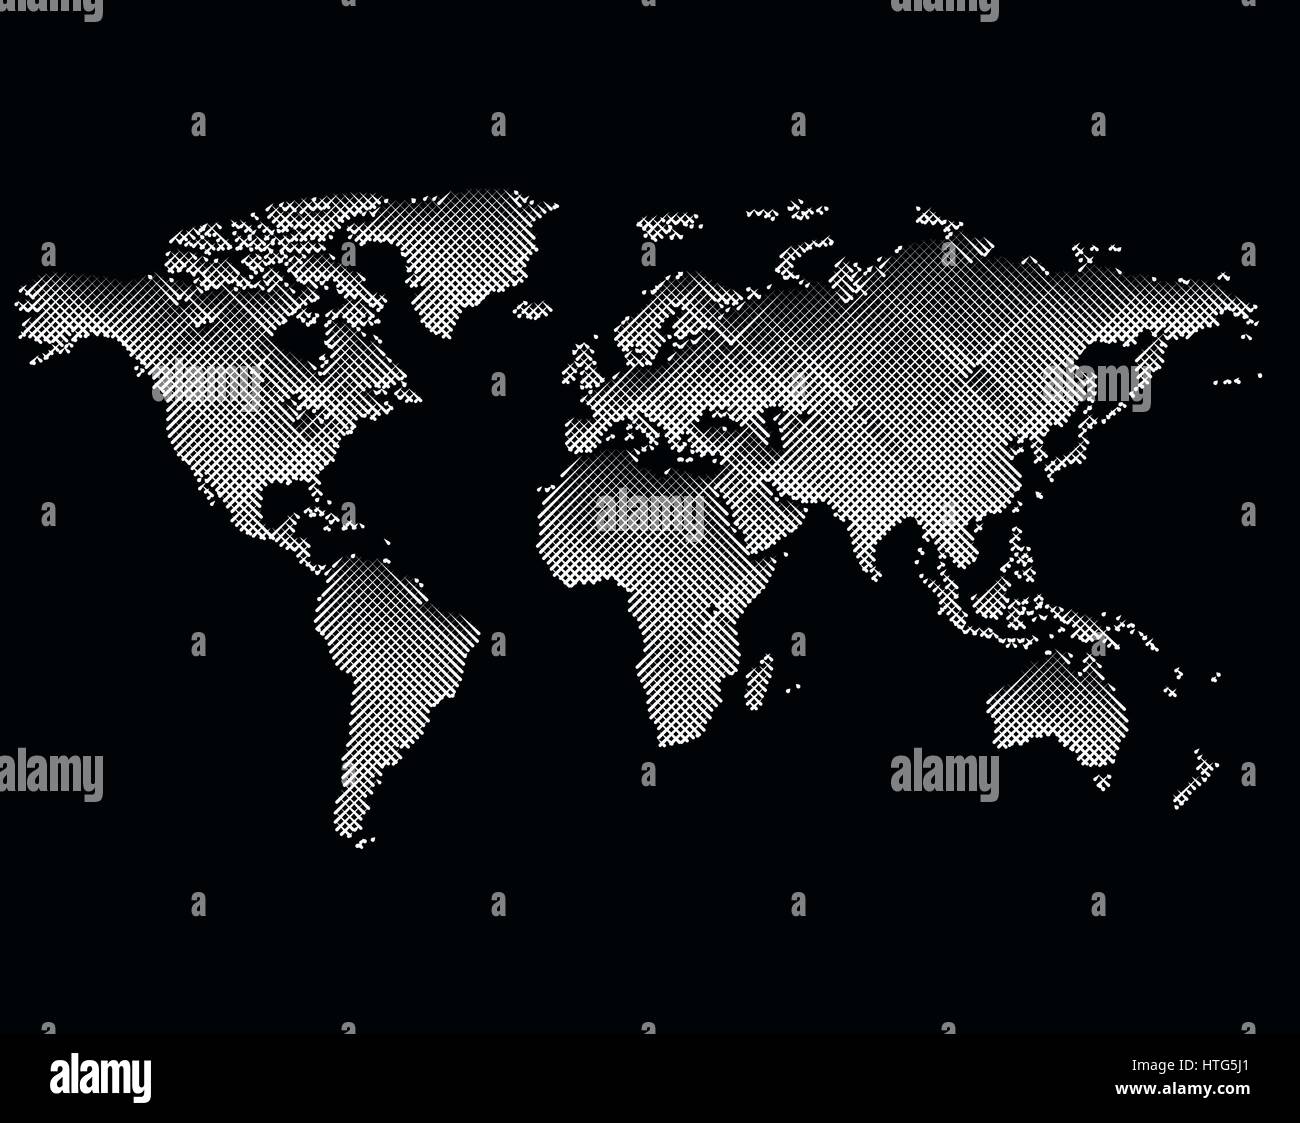 Isolated black color worldmap of lines background, earth vector illustration Stock Vector